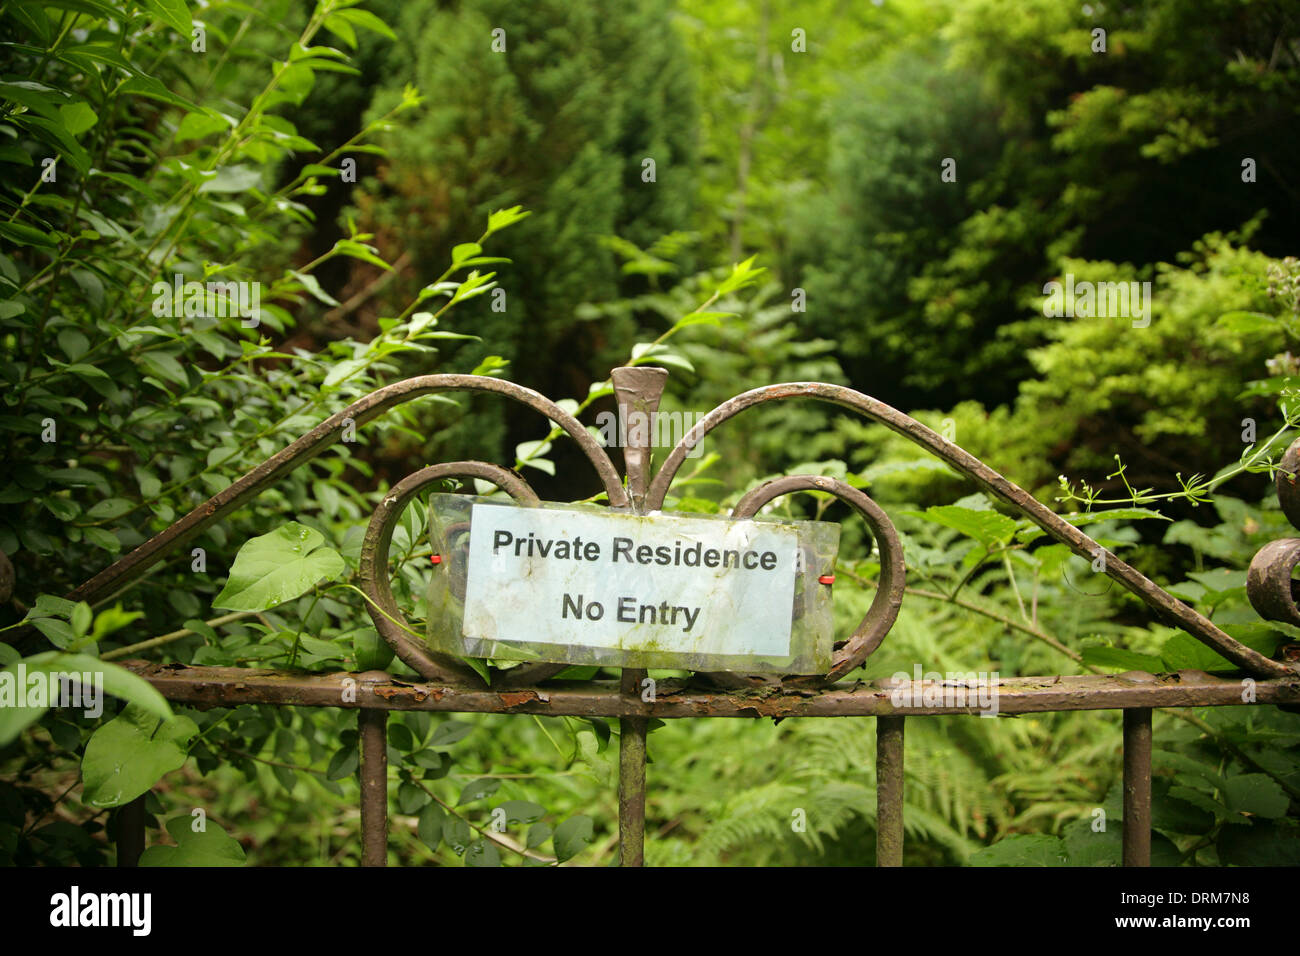 No Entry sign on old wrought iron front gate of very overgrown garden. Stock Photo